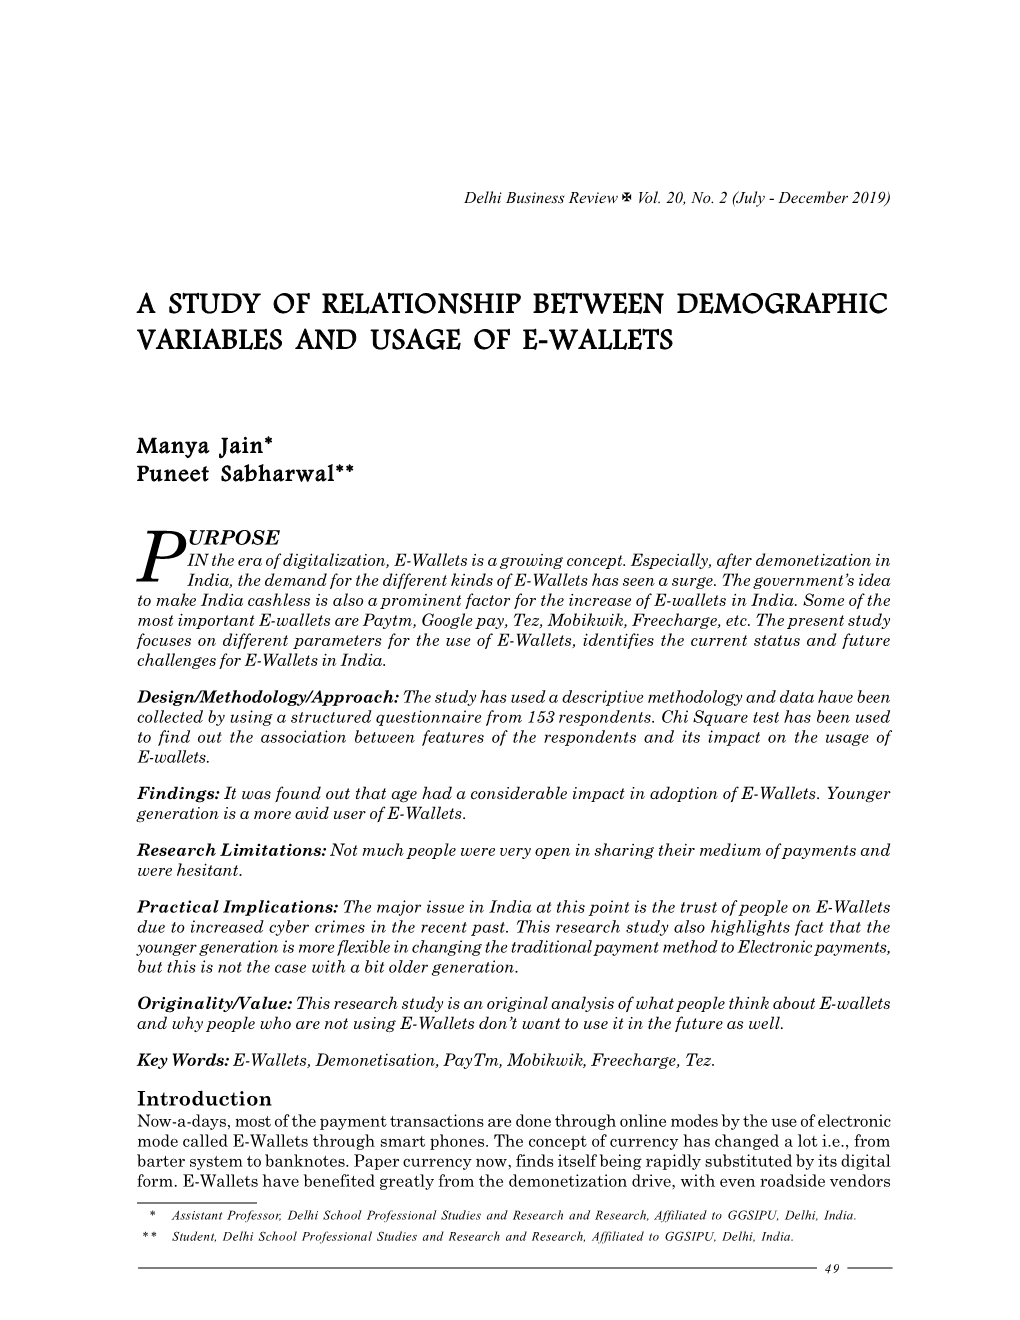 A Study of Relationship Between Demographic Variables and Usage of E-Wallets